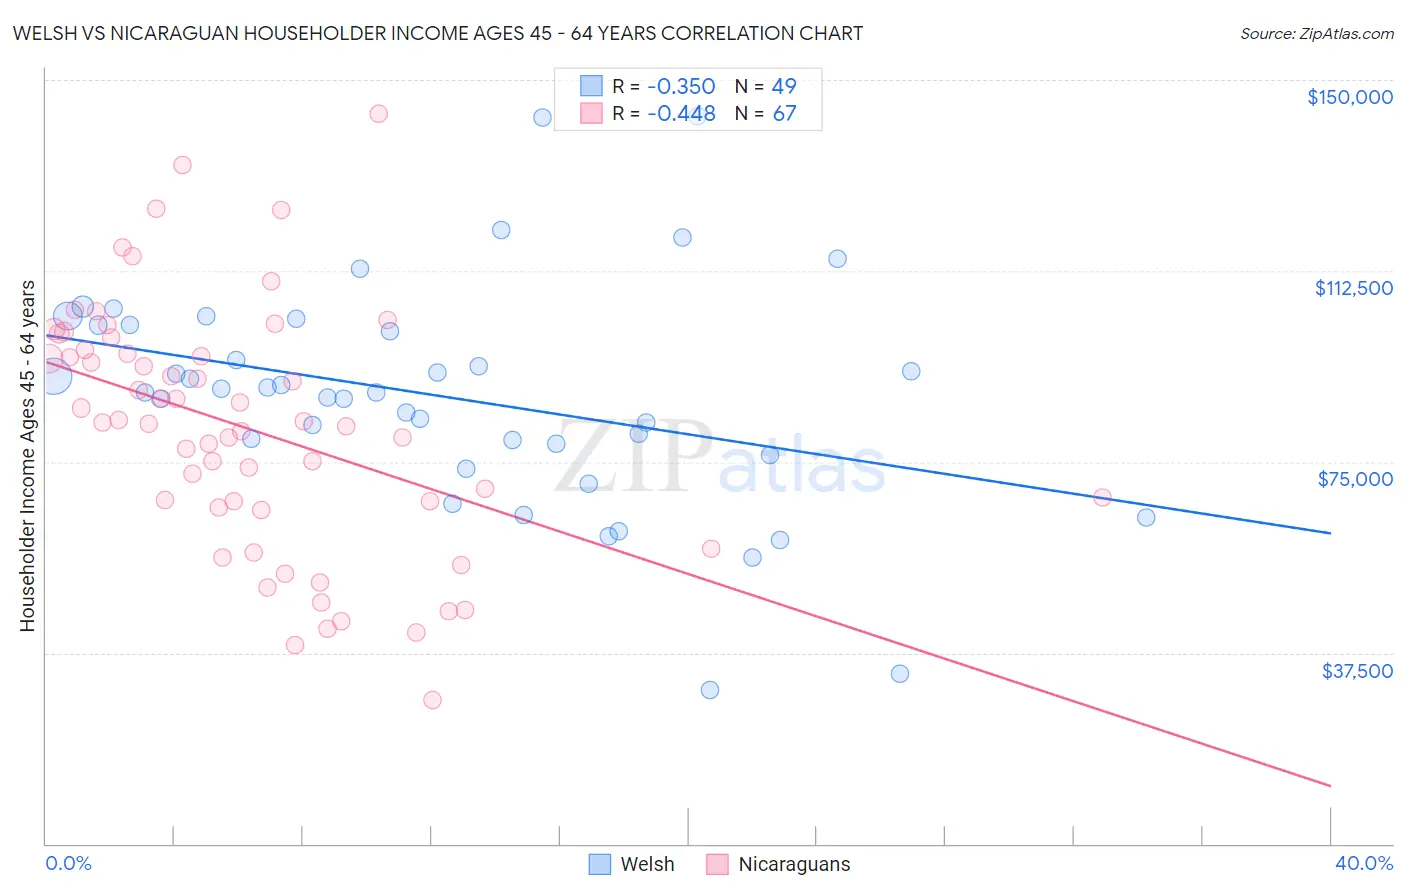 Welsh vs Nicaraguan Householder Income Ages 45 - 64 years